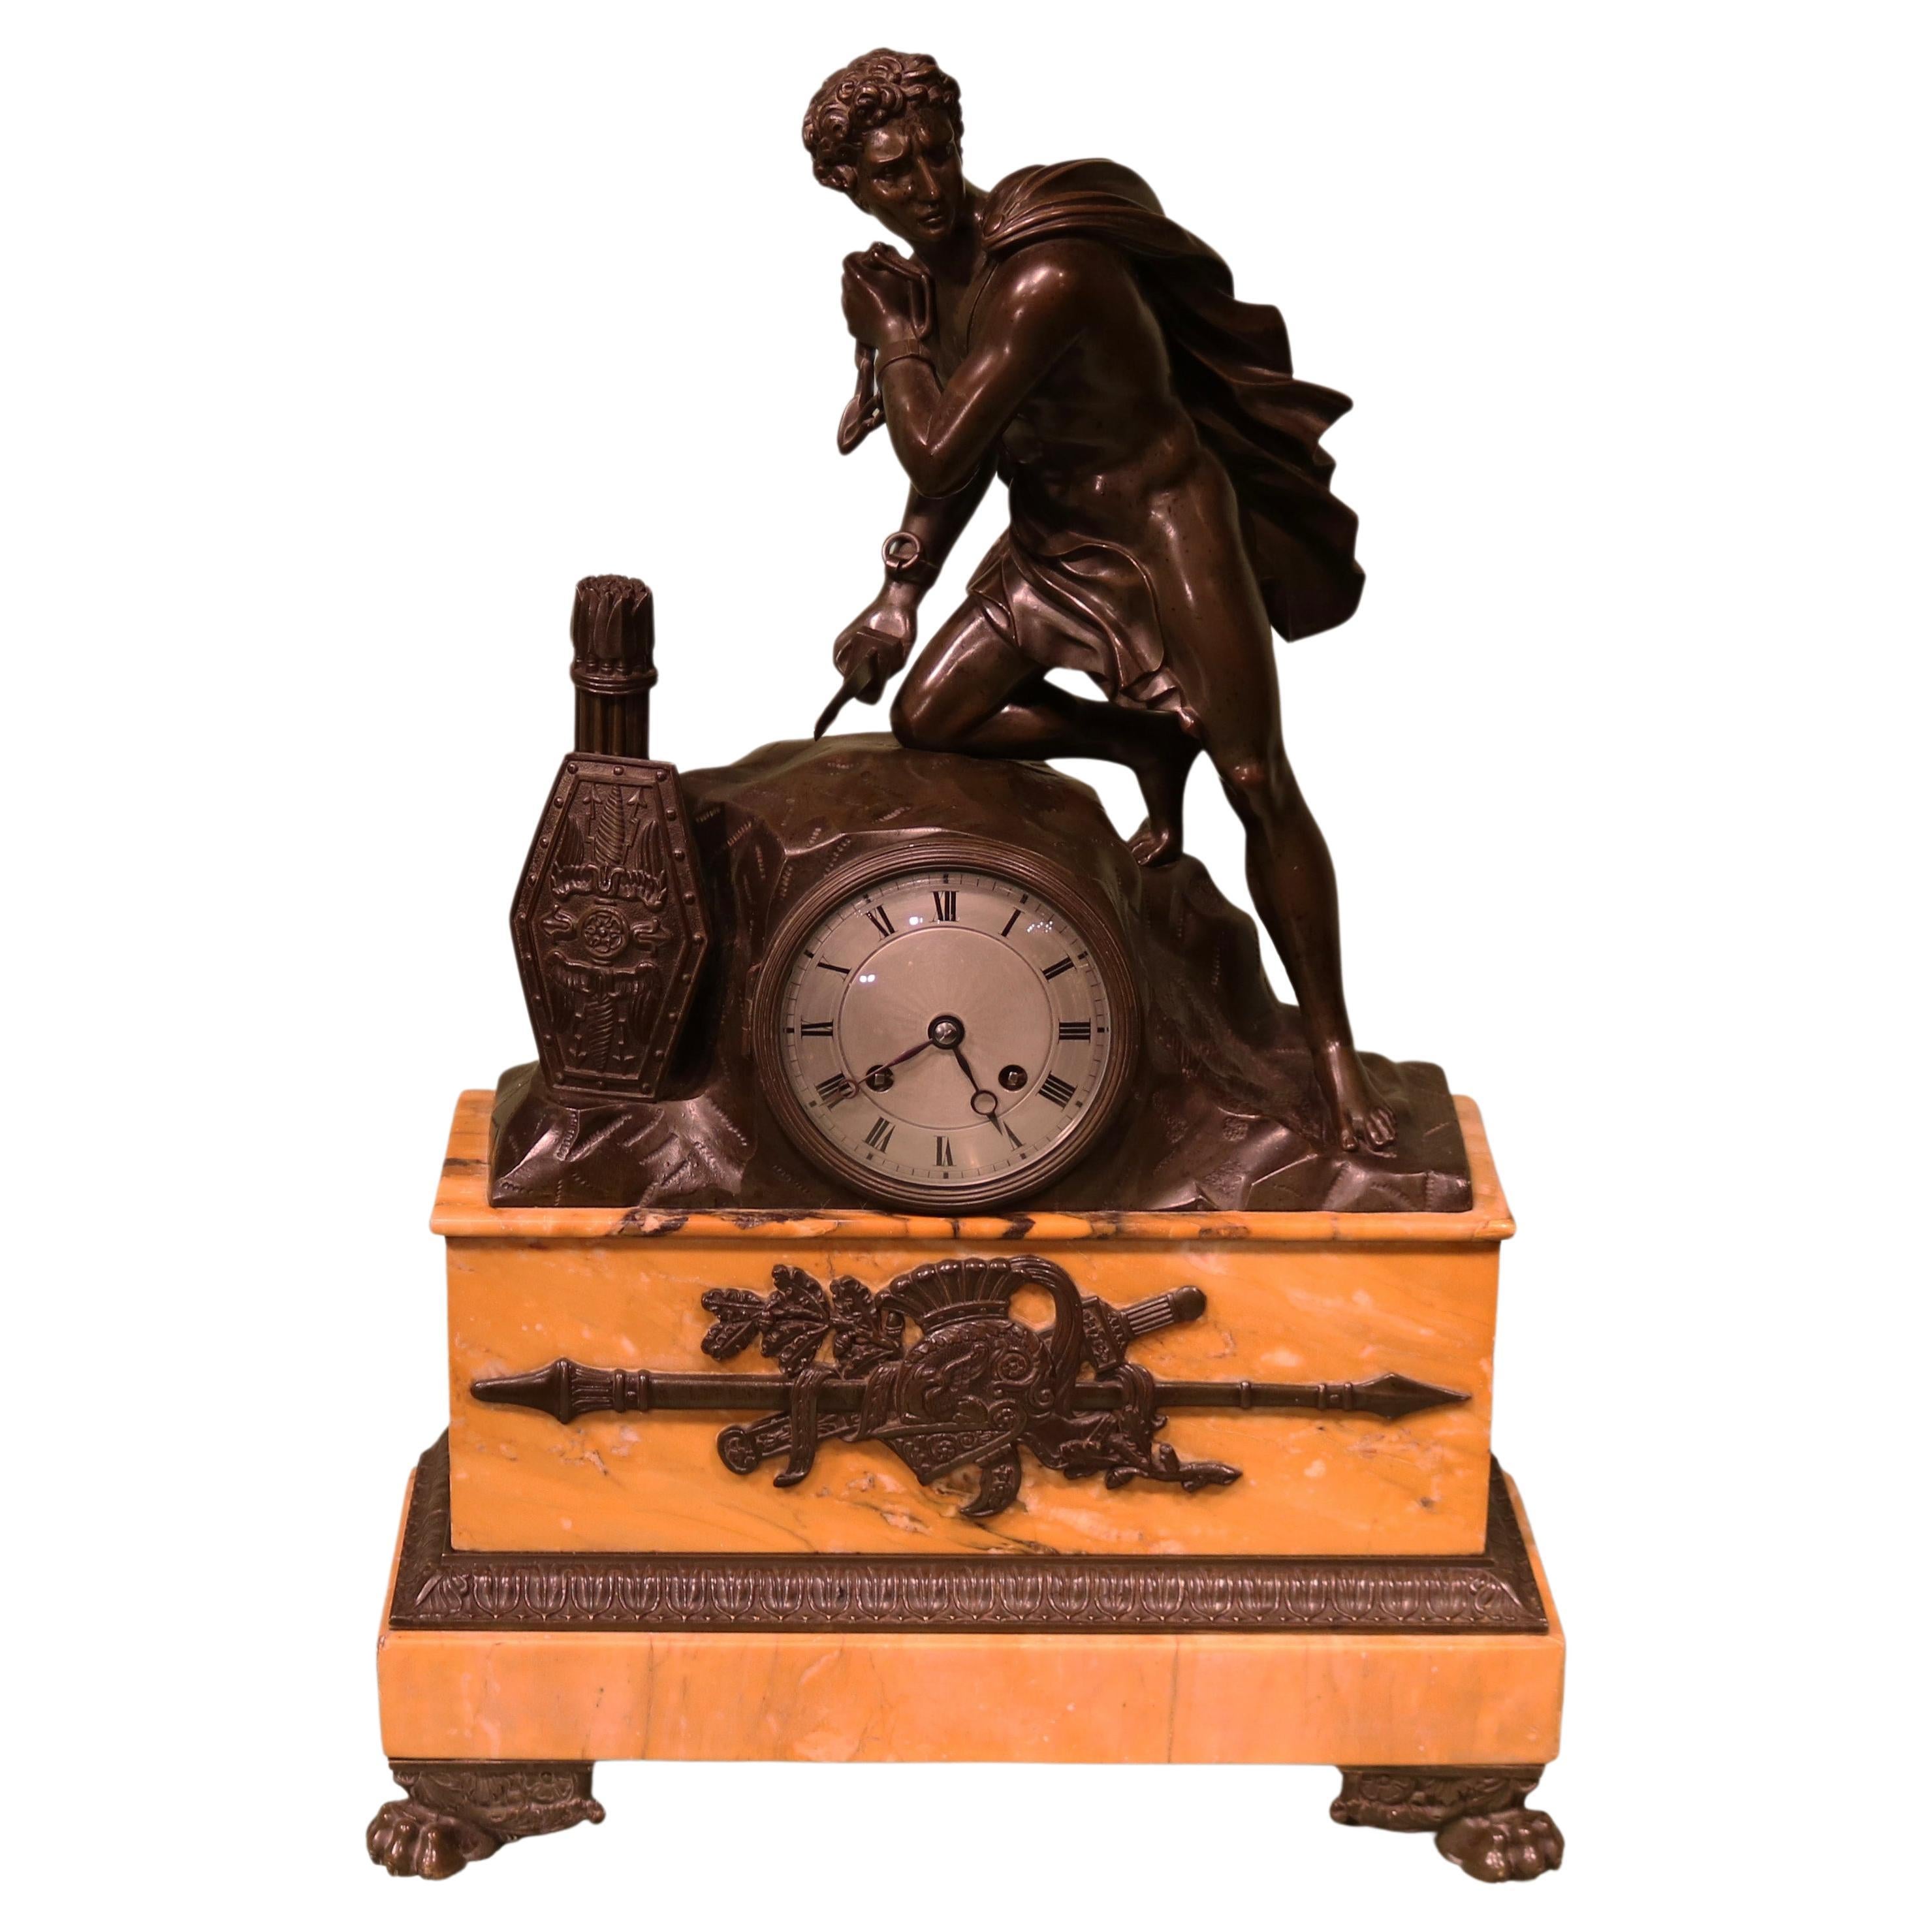 An early 19th century French bronze and marble mantel clock